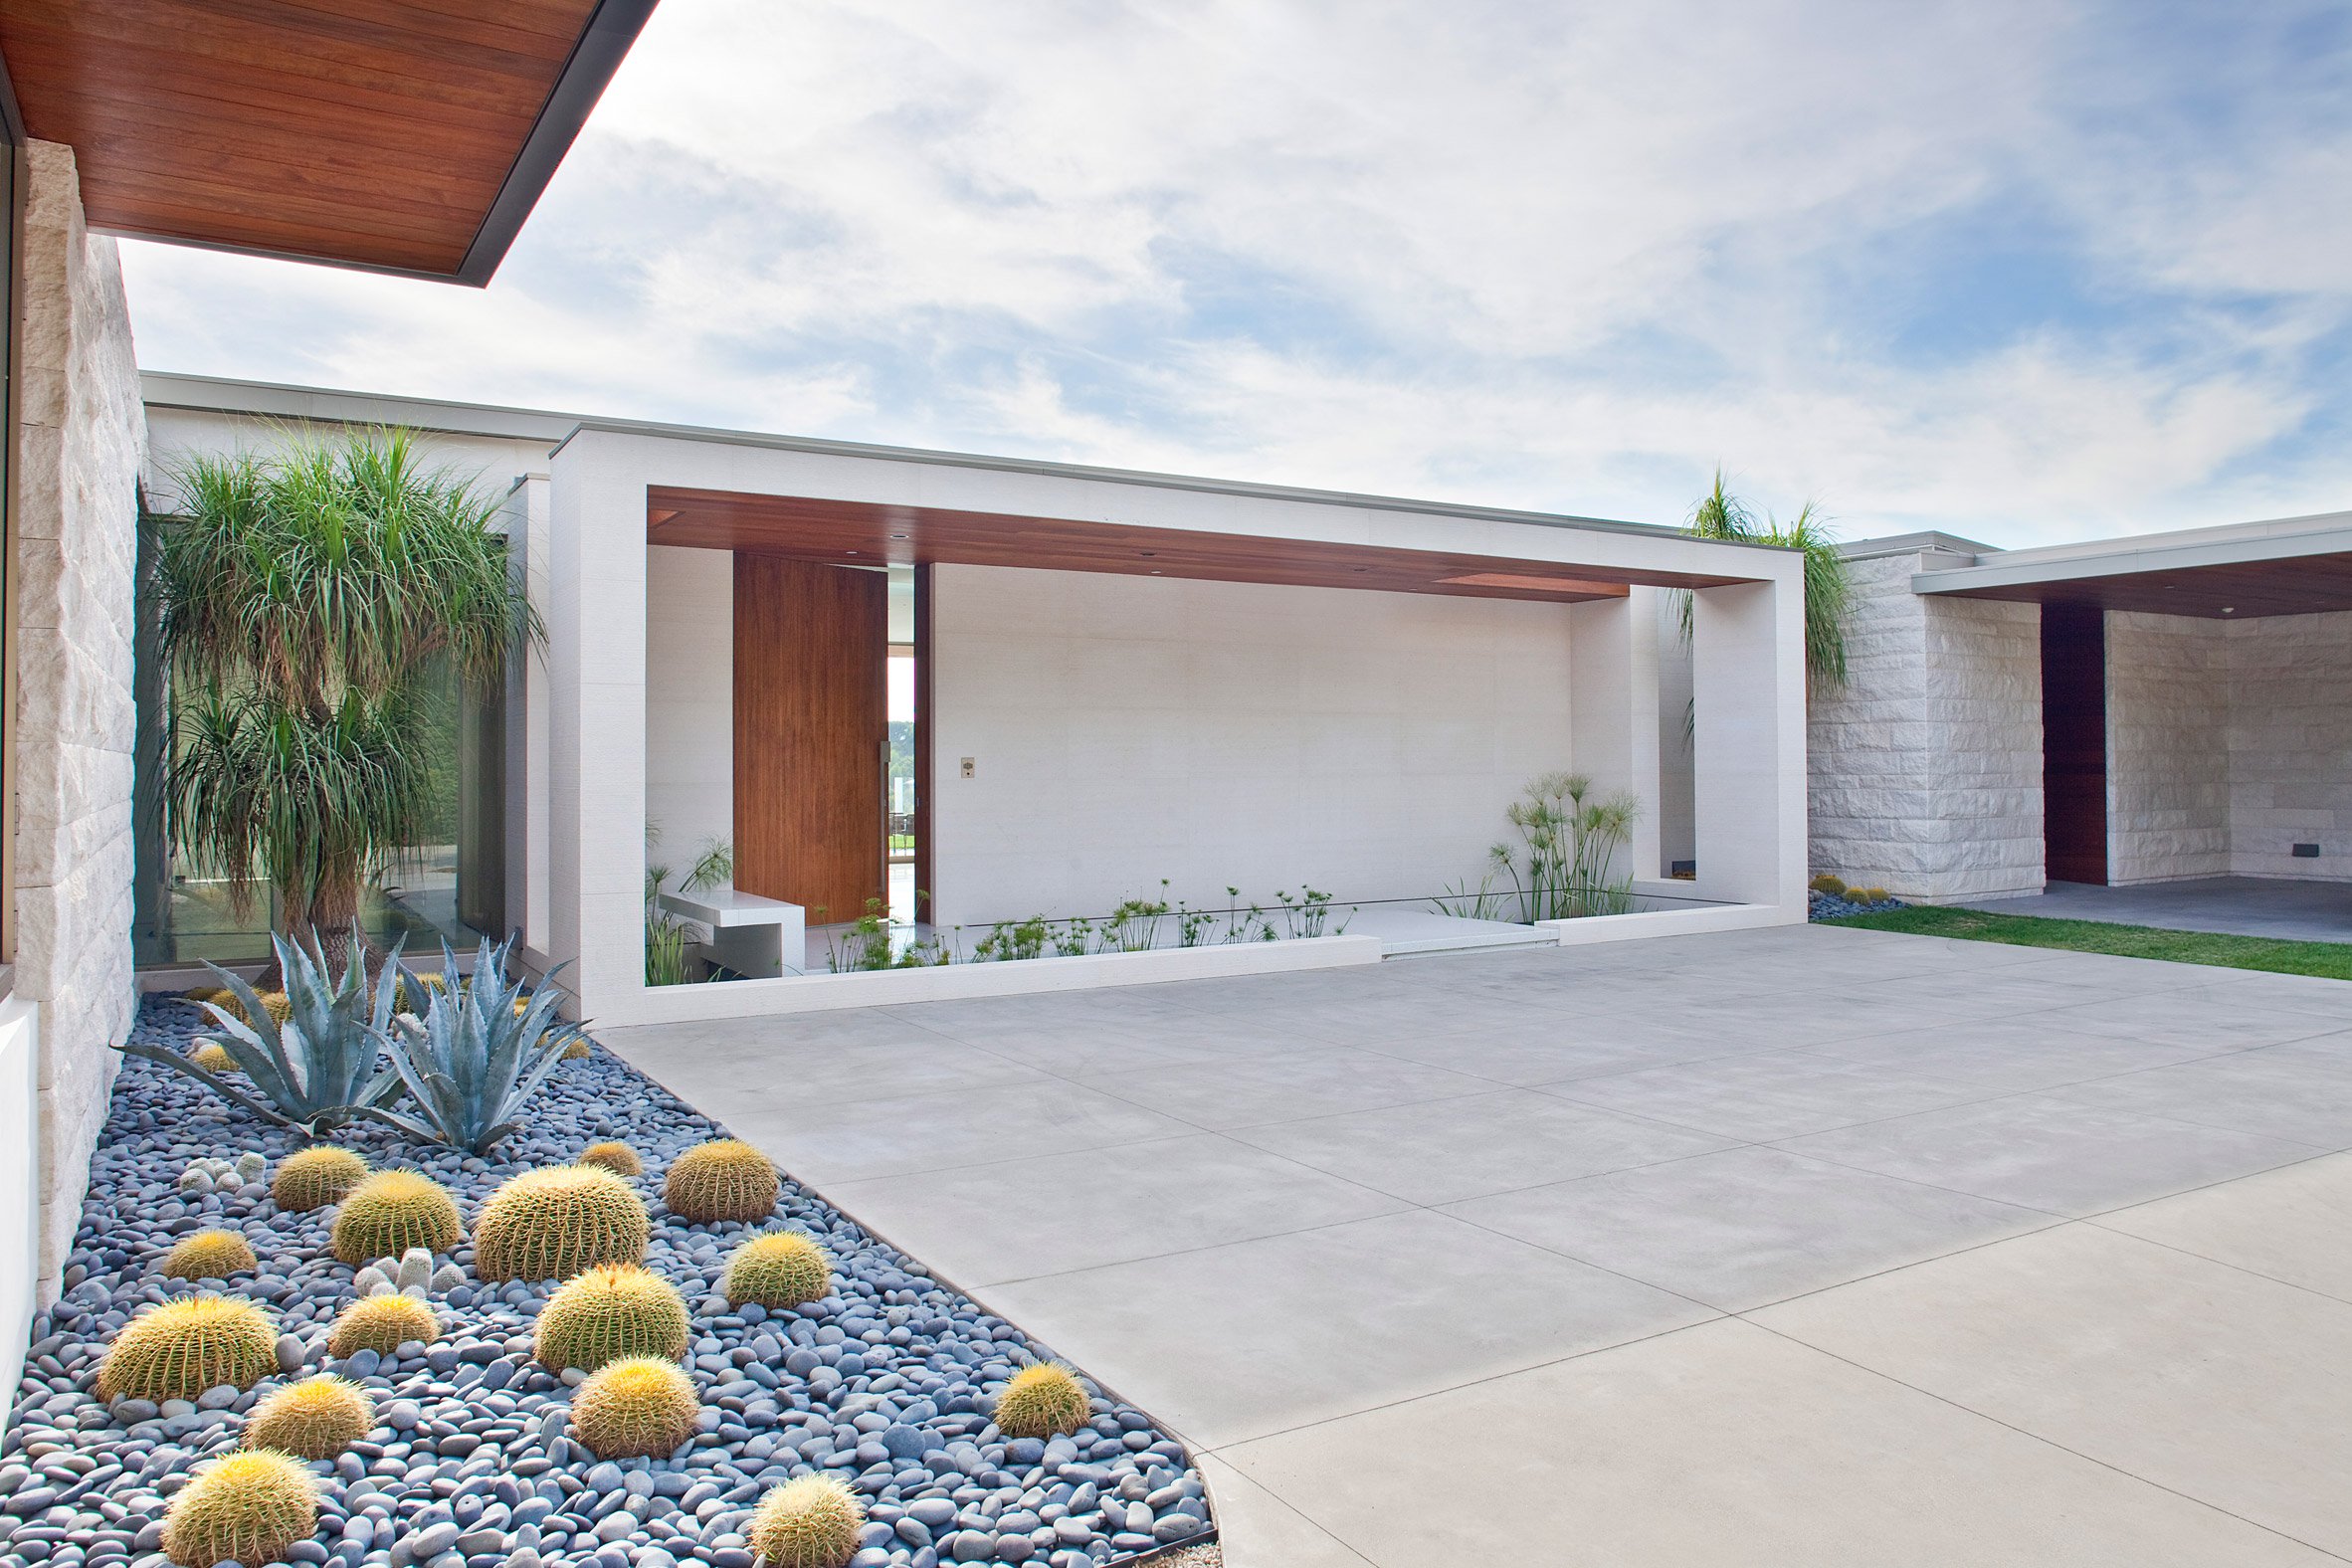 The house is painted white to avoid overheating, the courtyard is clad with white tiles, and there are cacti and succulents traditional for California